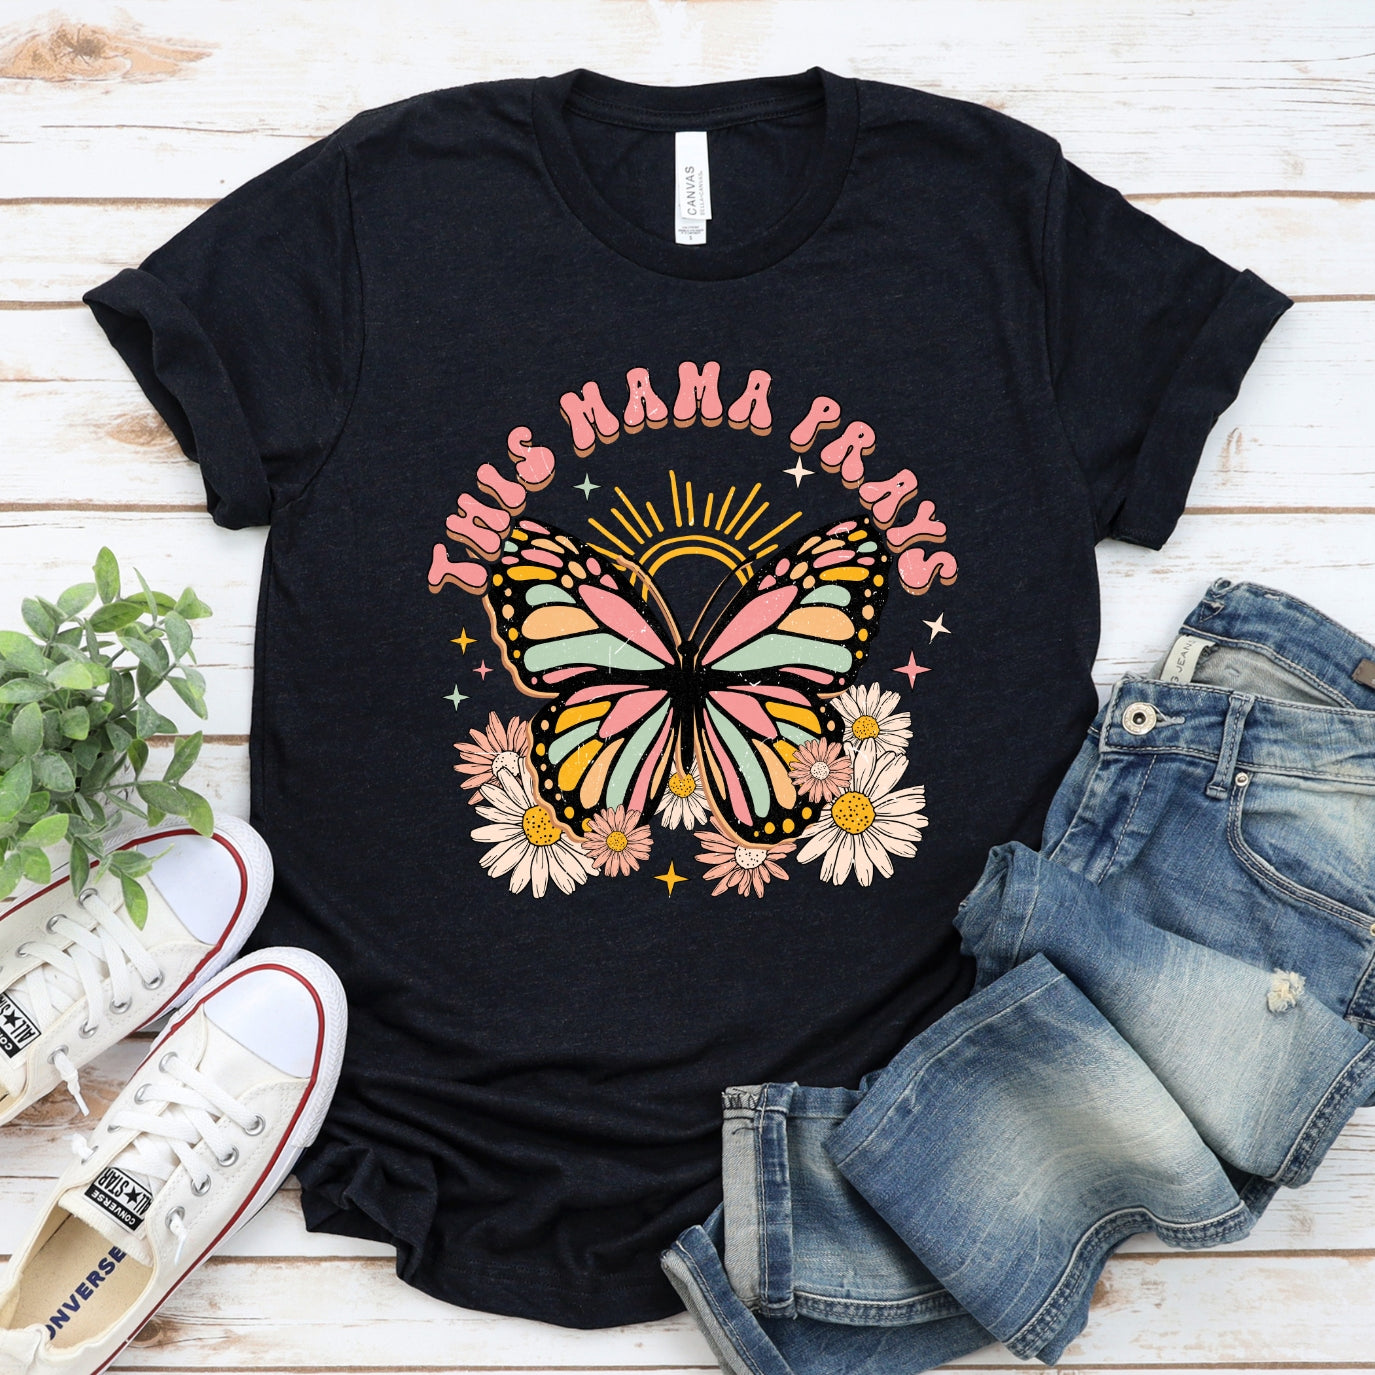 This Mama Prays Floral Women's T-Shirt